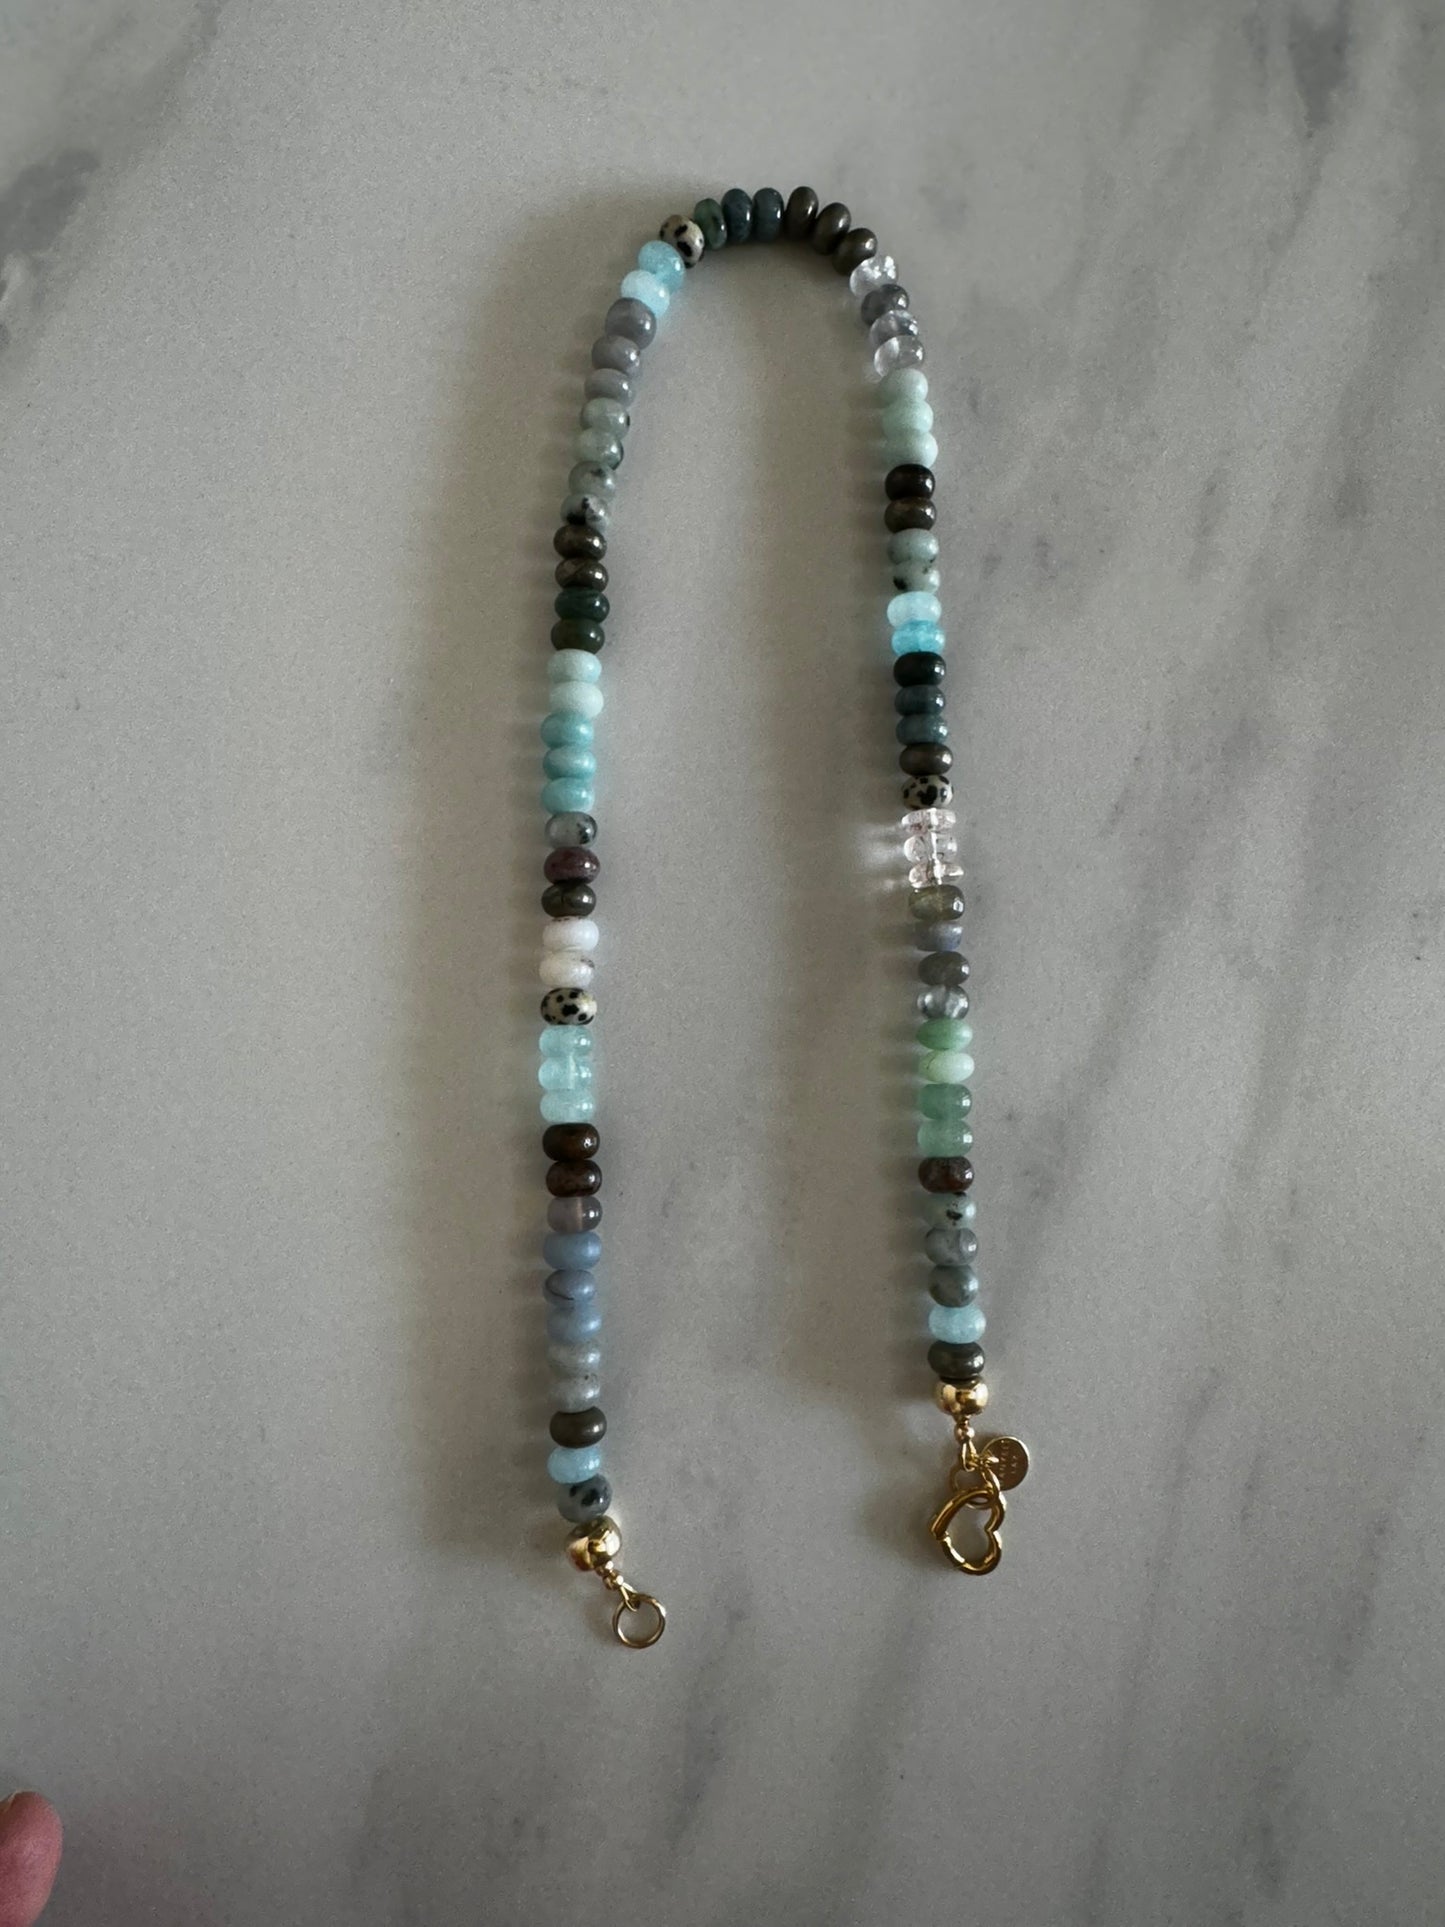 Blue and gray multi gemstone necklace